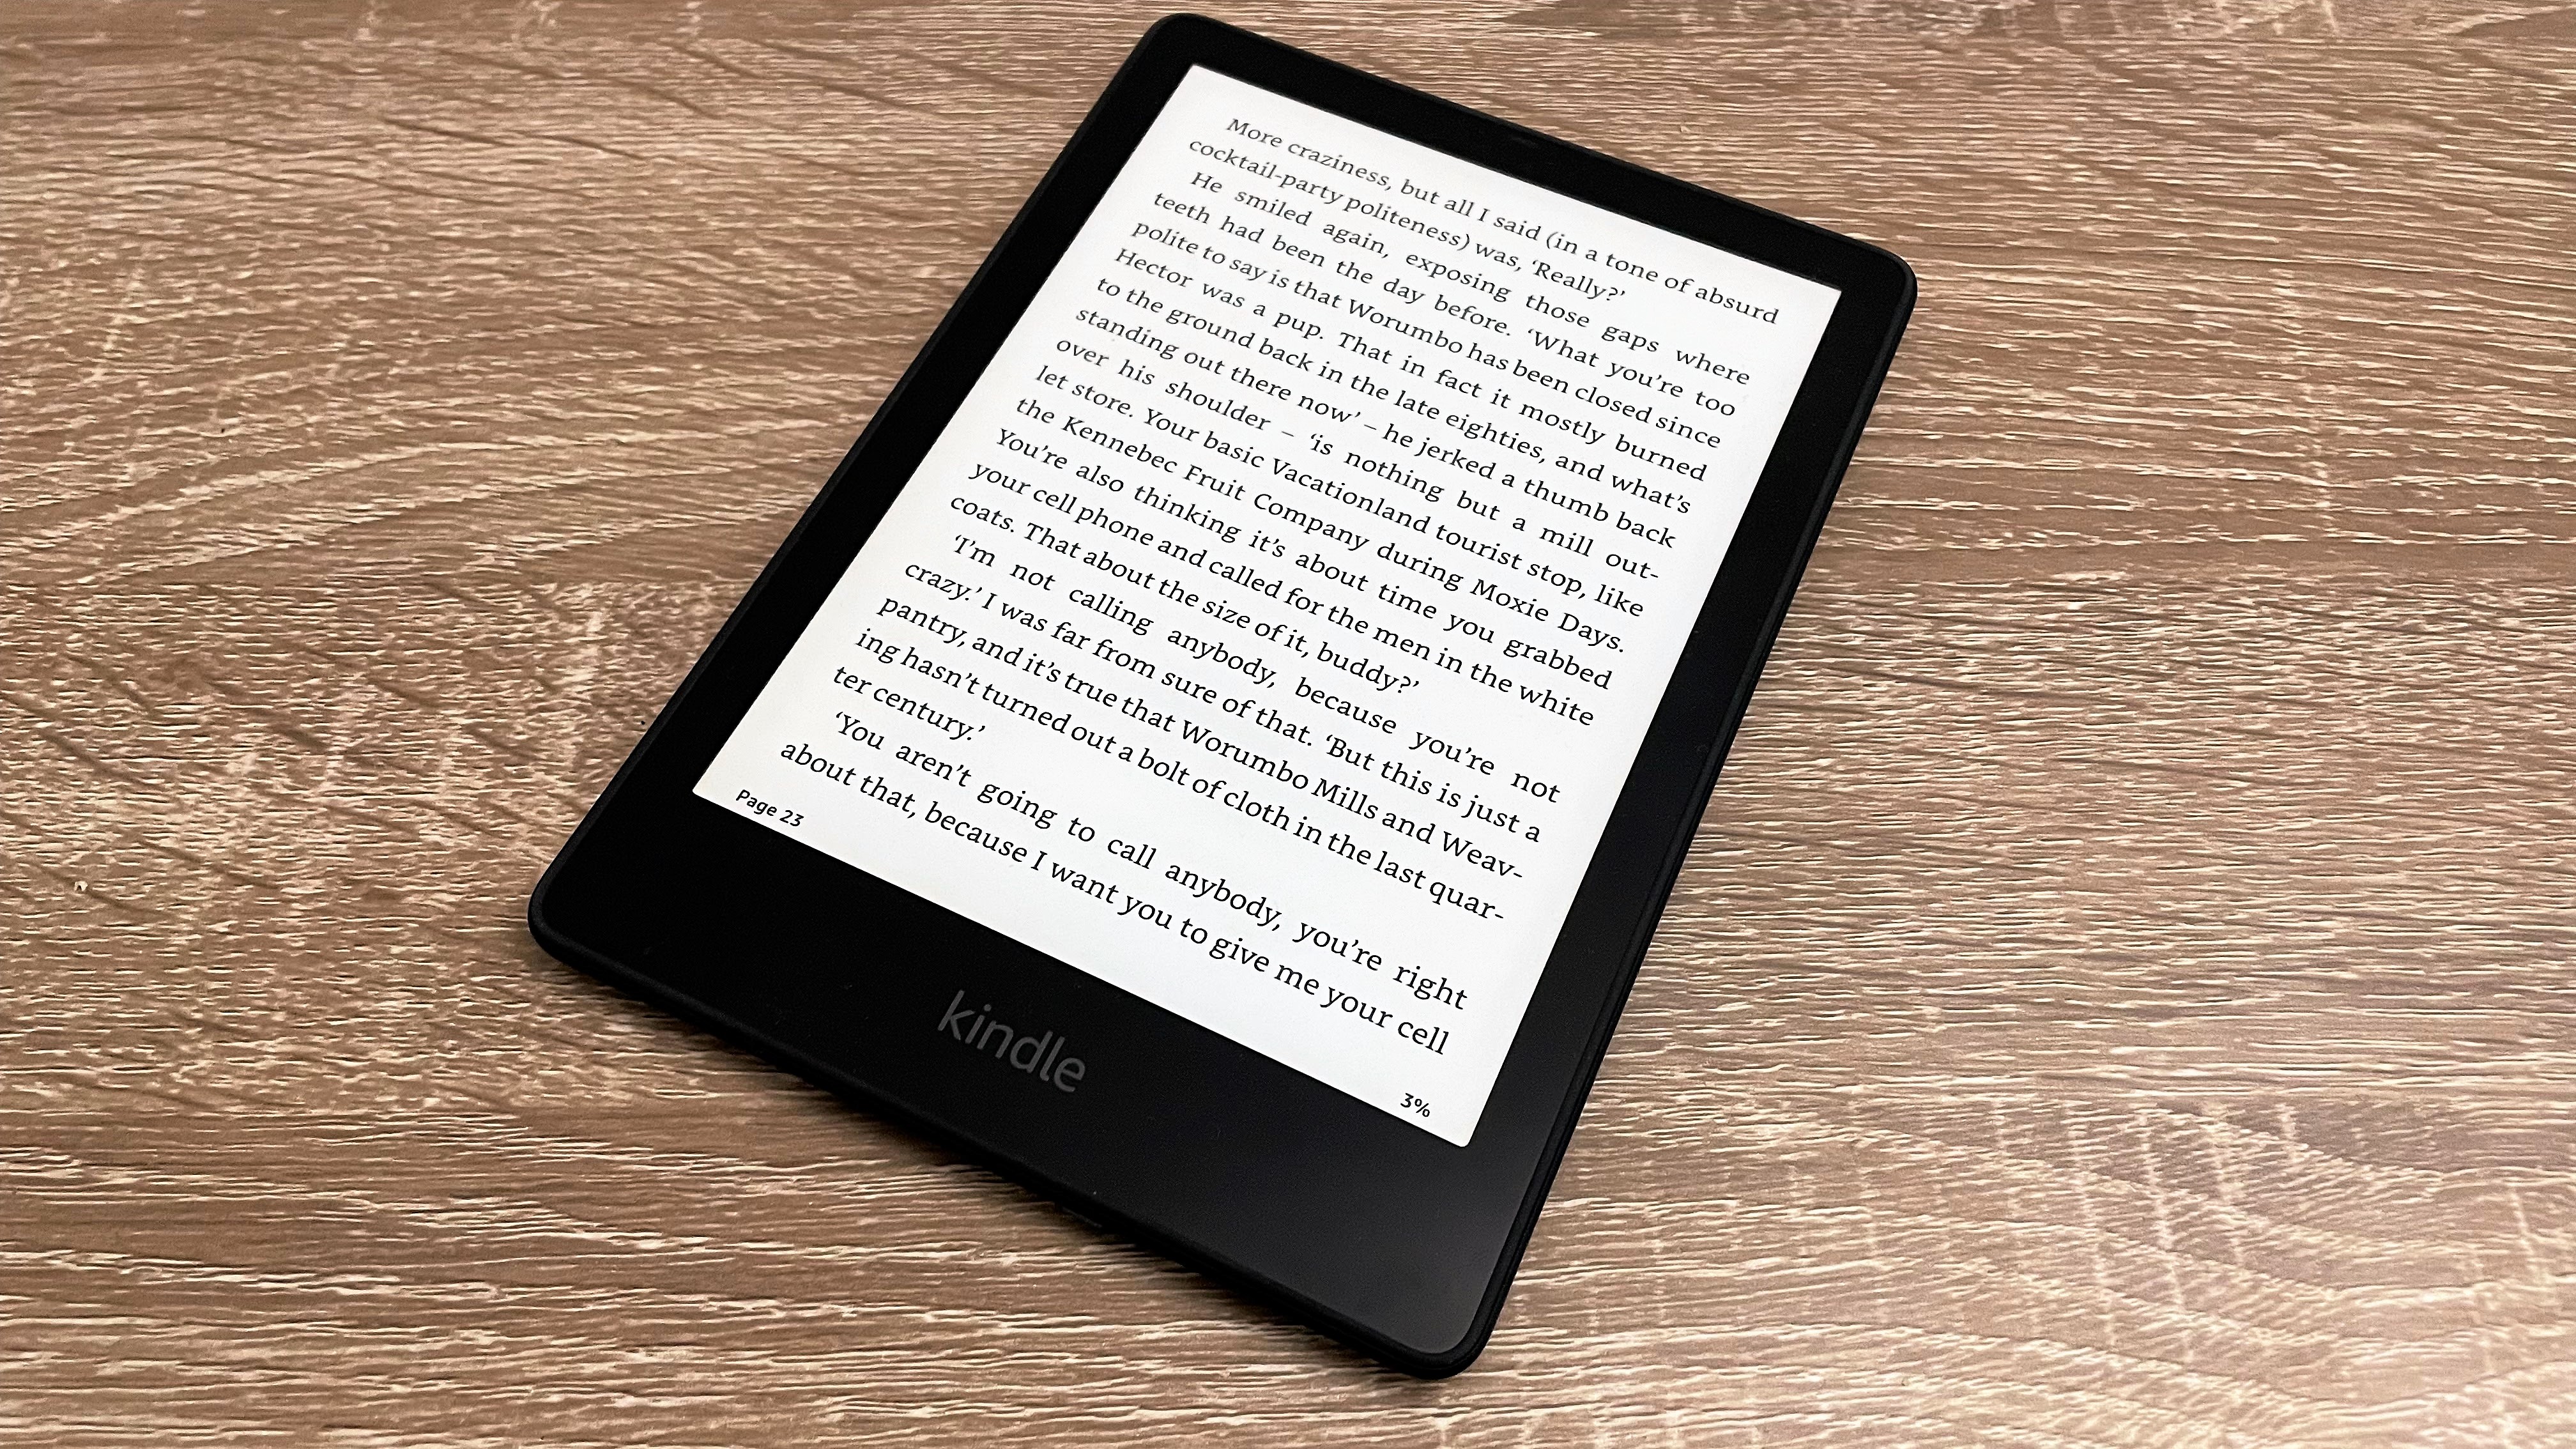 Don't Pay $190, Get a 32GB Kindle Paperwhite Signature Edition